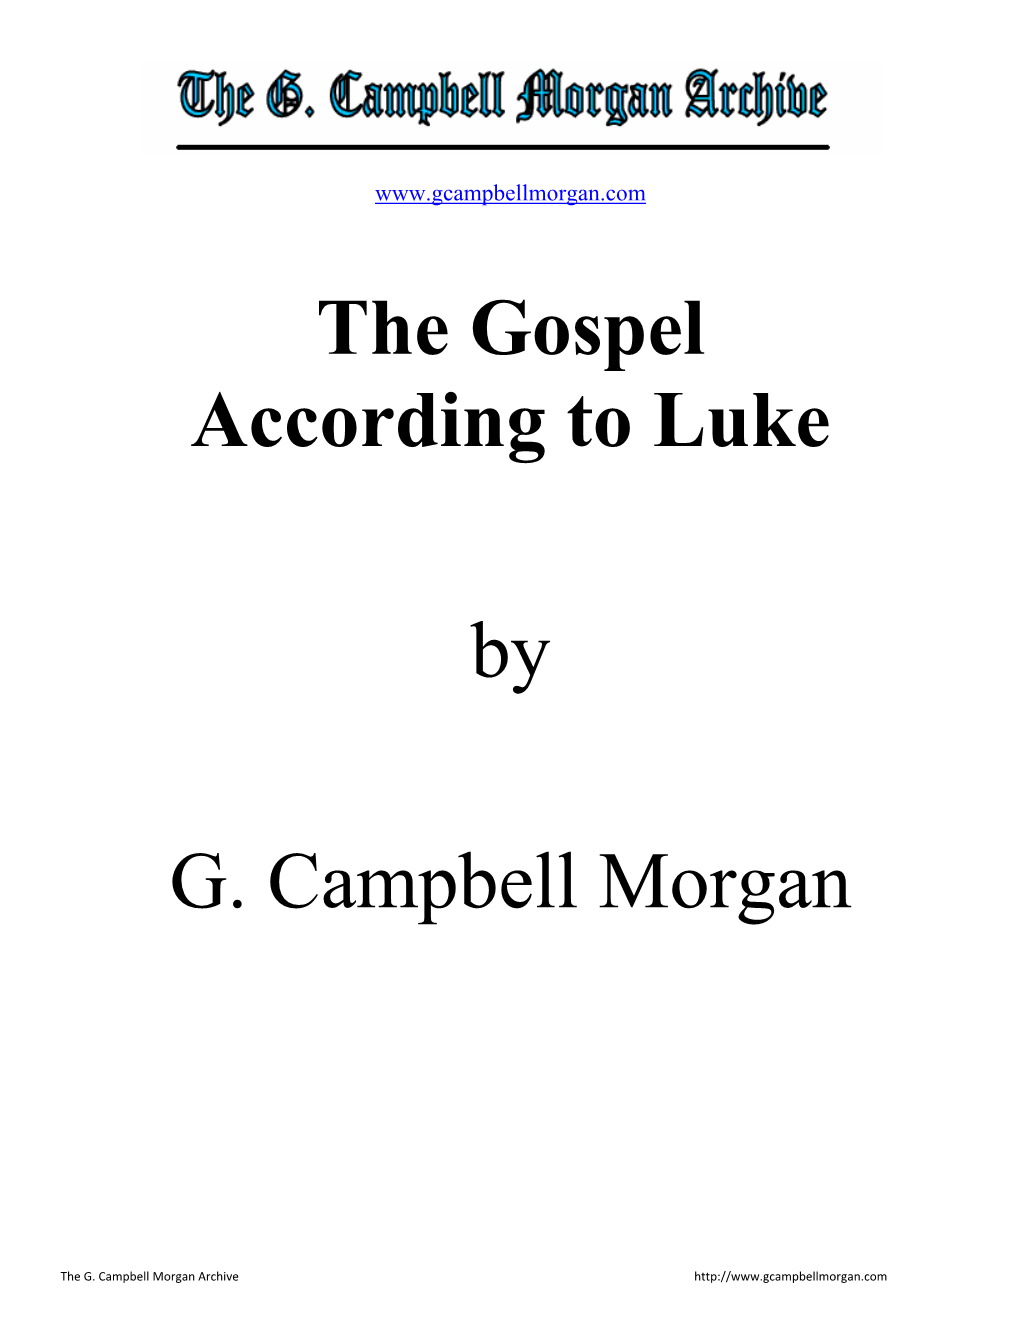 The Gospel According to Luke by G. Campbell Morgan